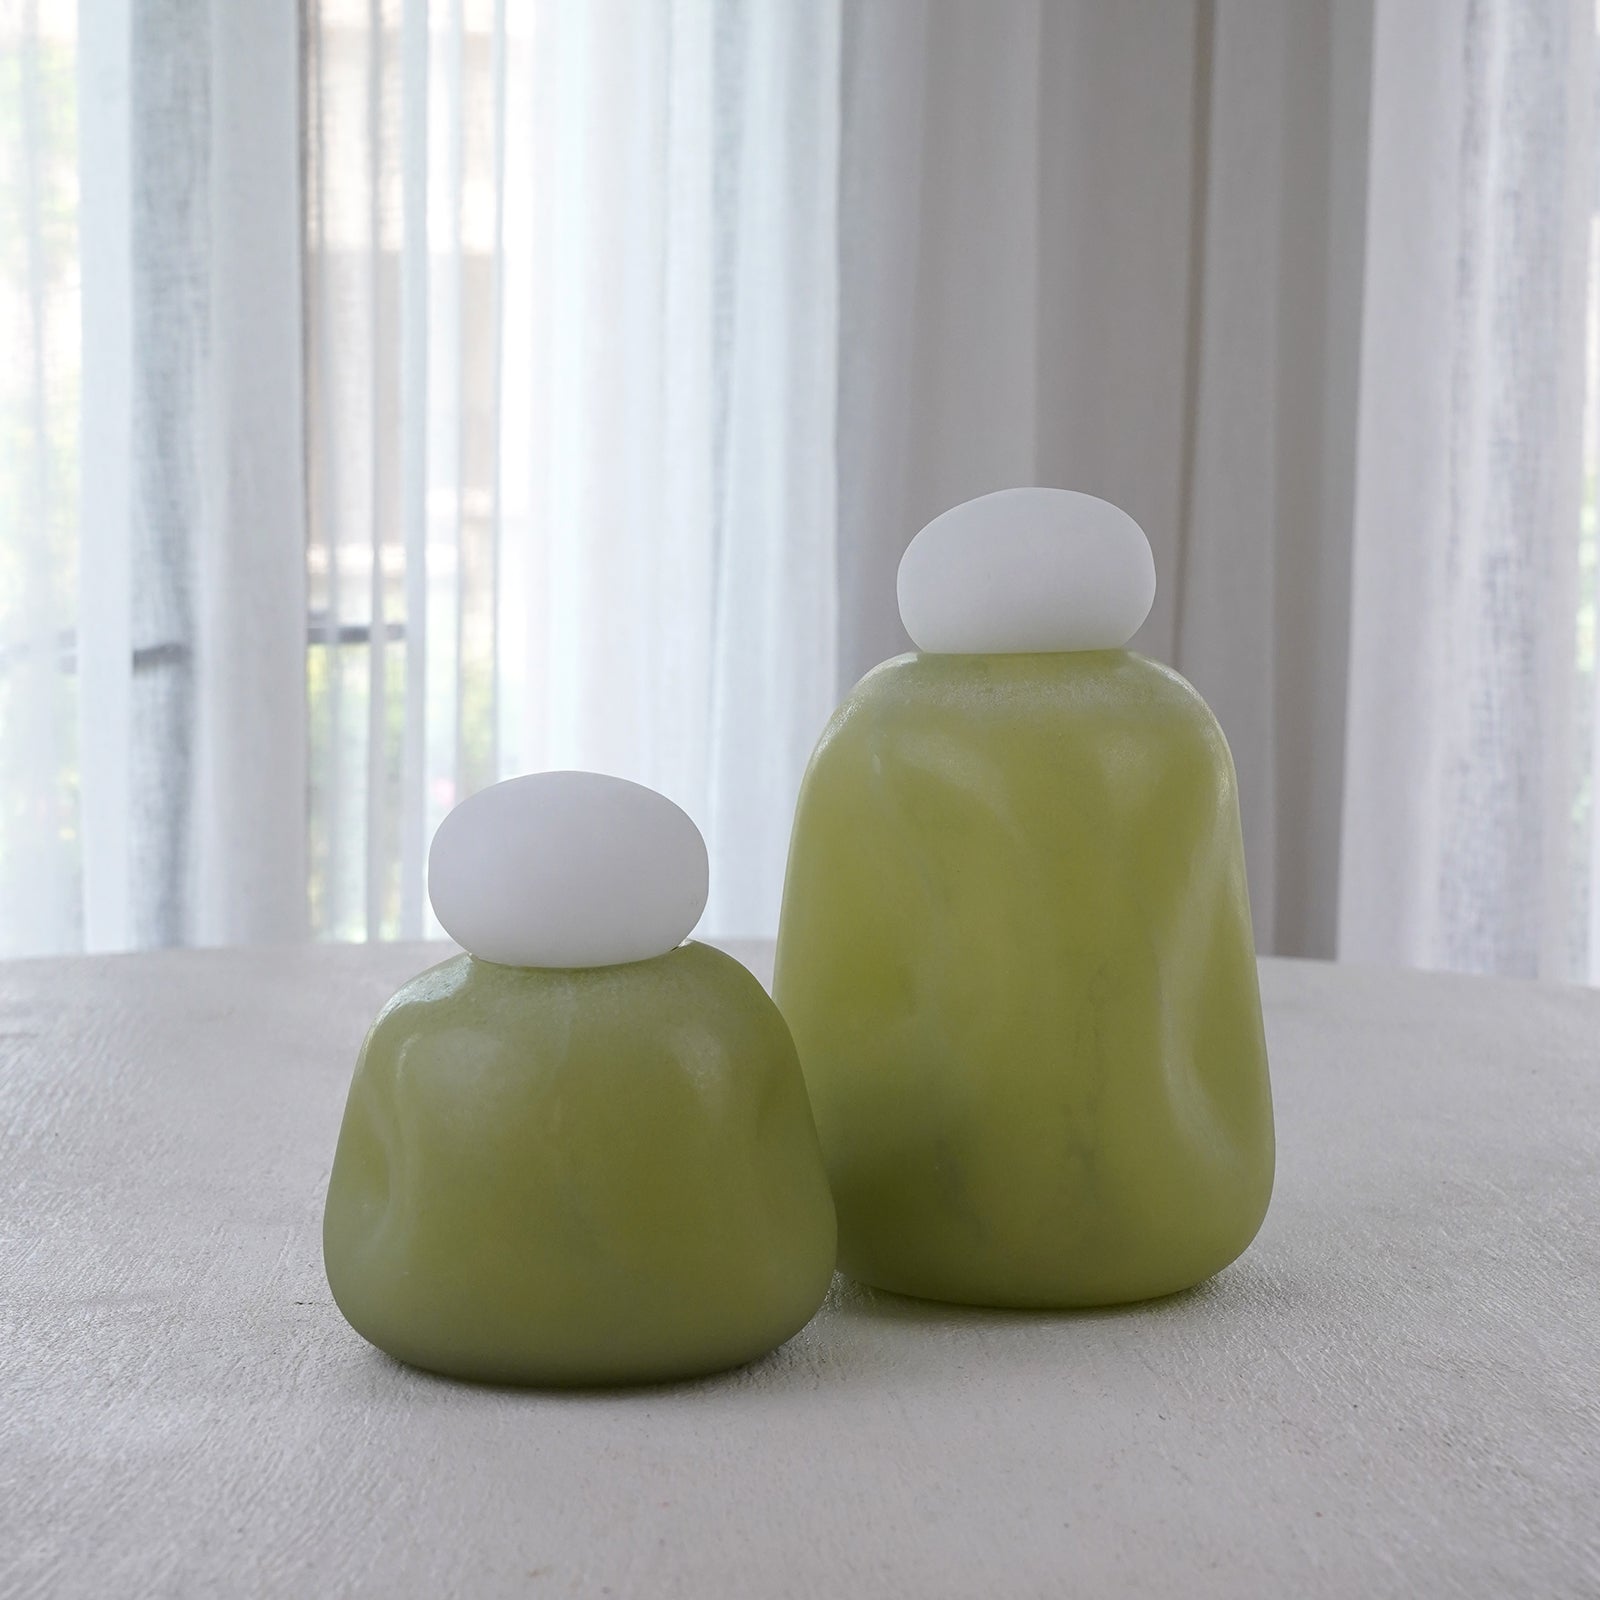 Pistachio Green - Decorative Glass Vase With Lid  - WS Living - UAE - Vase Wood and steel Furnitures - Dubai